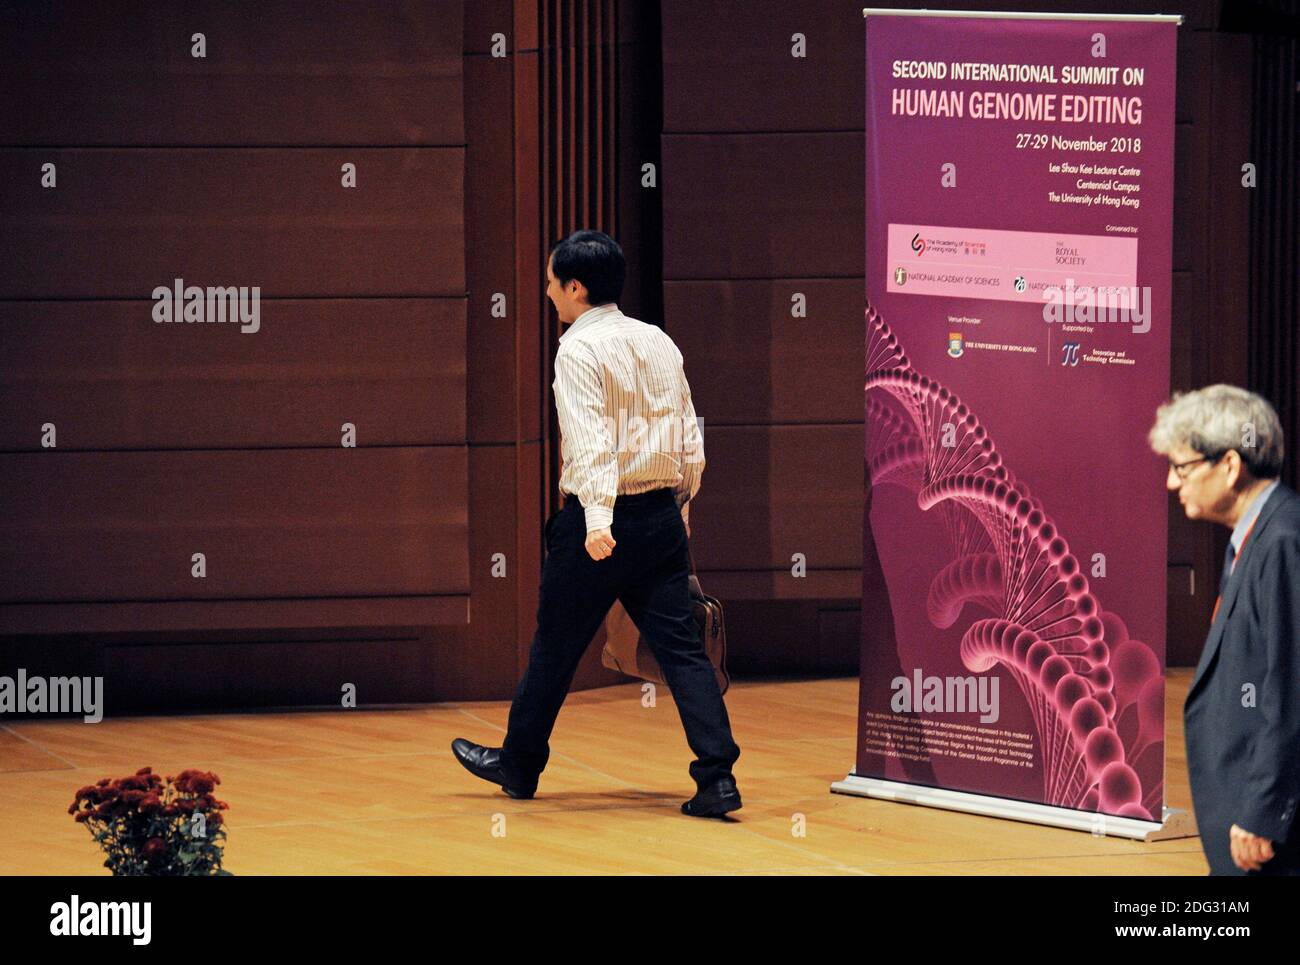 Chinese biologist He Jiankui gives a presentation at Hong Kong University during the Second International Summit on Humane Genome Editing. He had biologically altered the genome of two twins in an attempt to make them resistant to AIDS, which their biological father had. He was condemned by the scientific community, and was taken into custody immediately after his talk and was eventually jailed. At right is Robin Lovell-Badge of the Crick Institute. Stock Photo